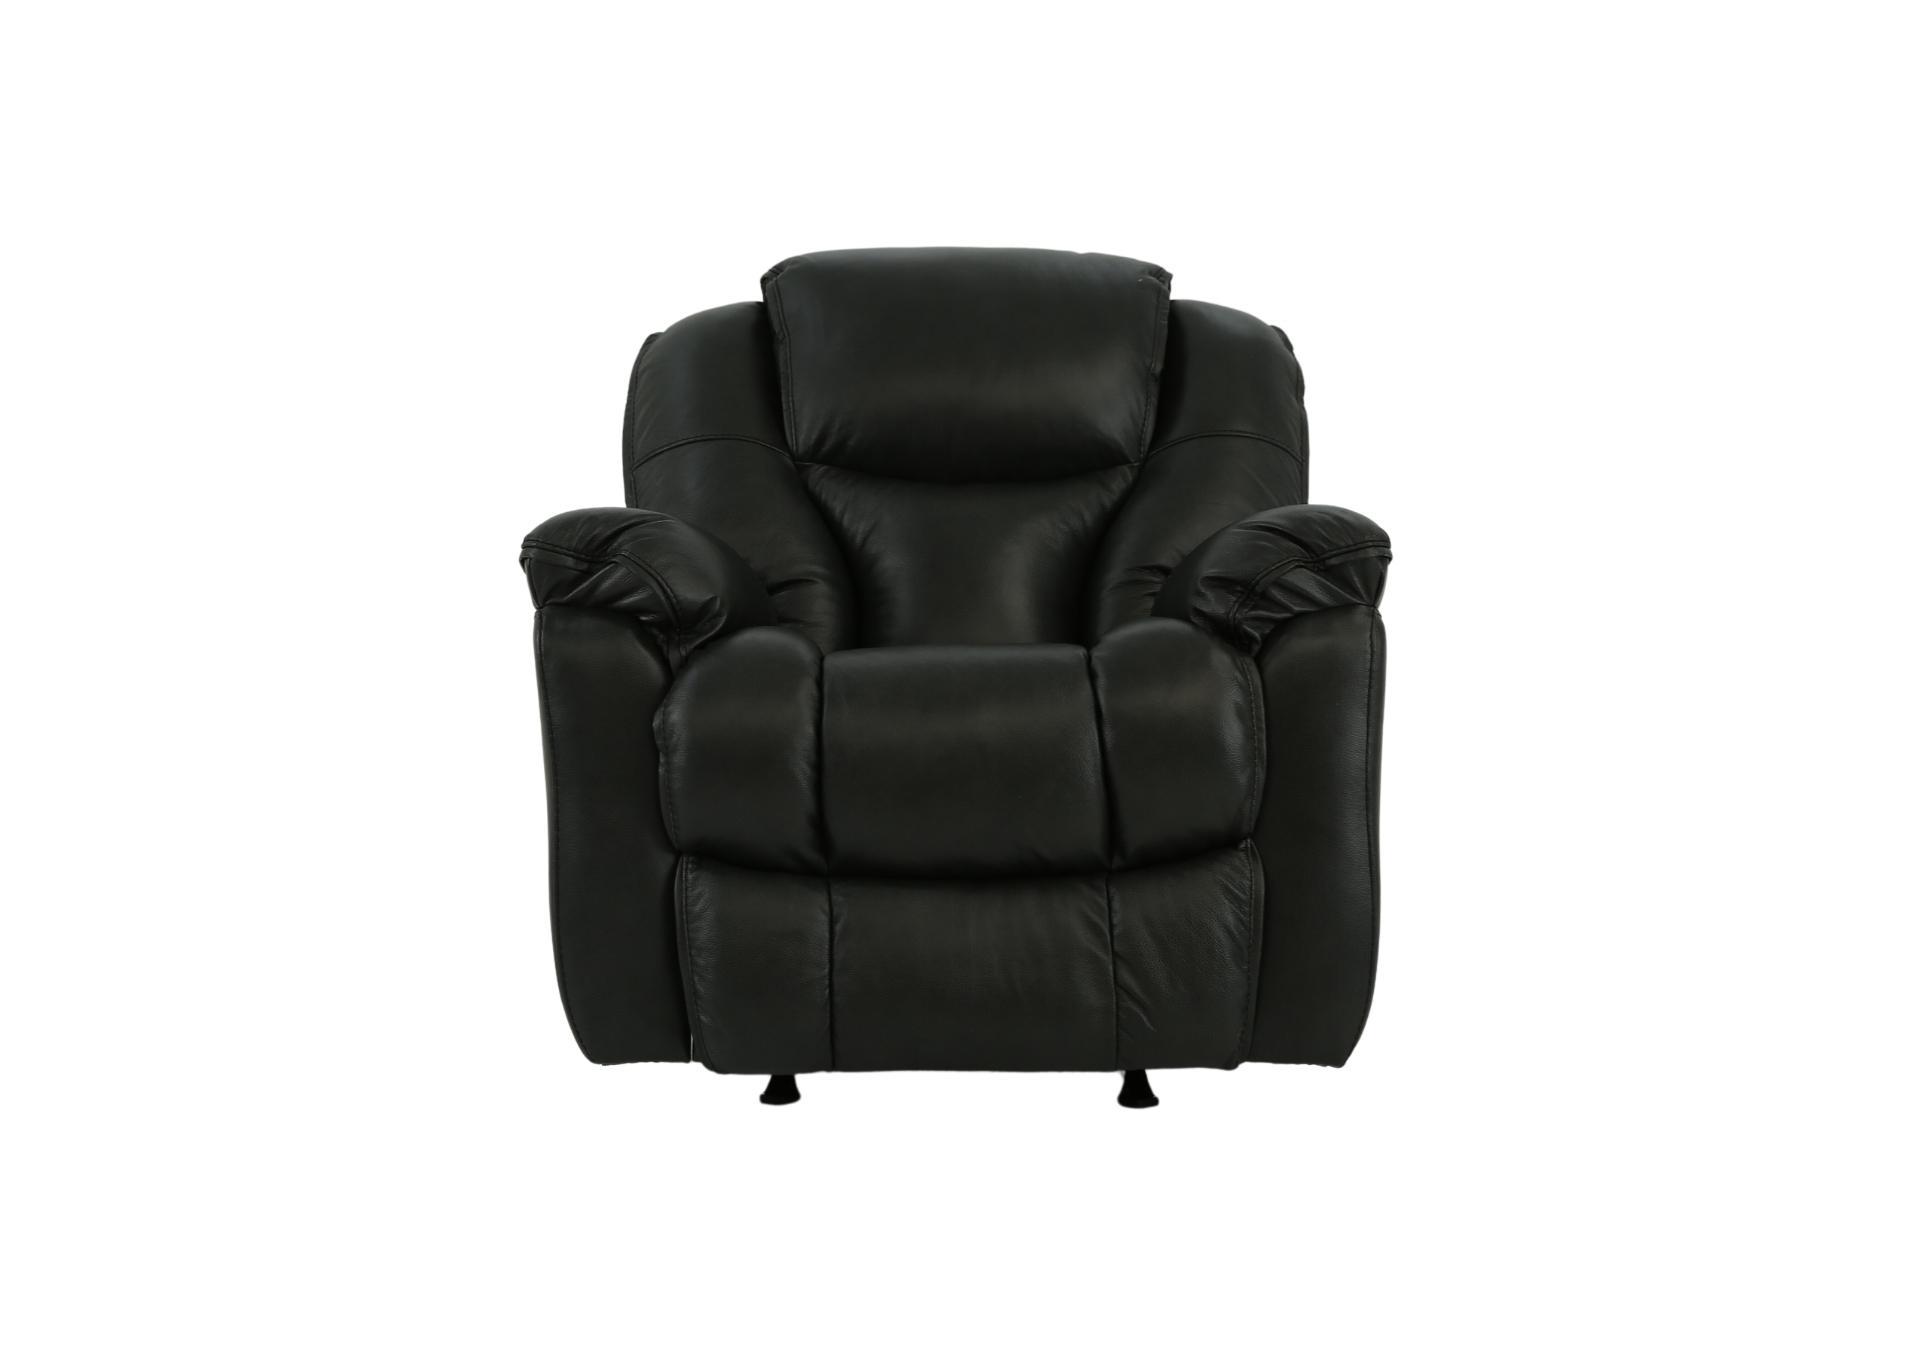 MUSTANG CHARCOAL LEATHER ROCKER RECLINER